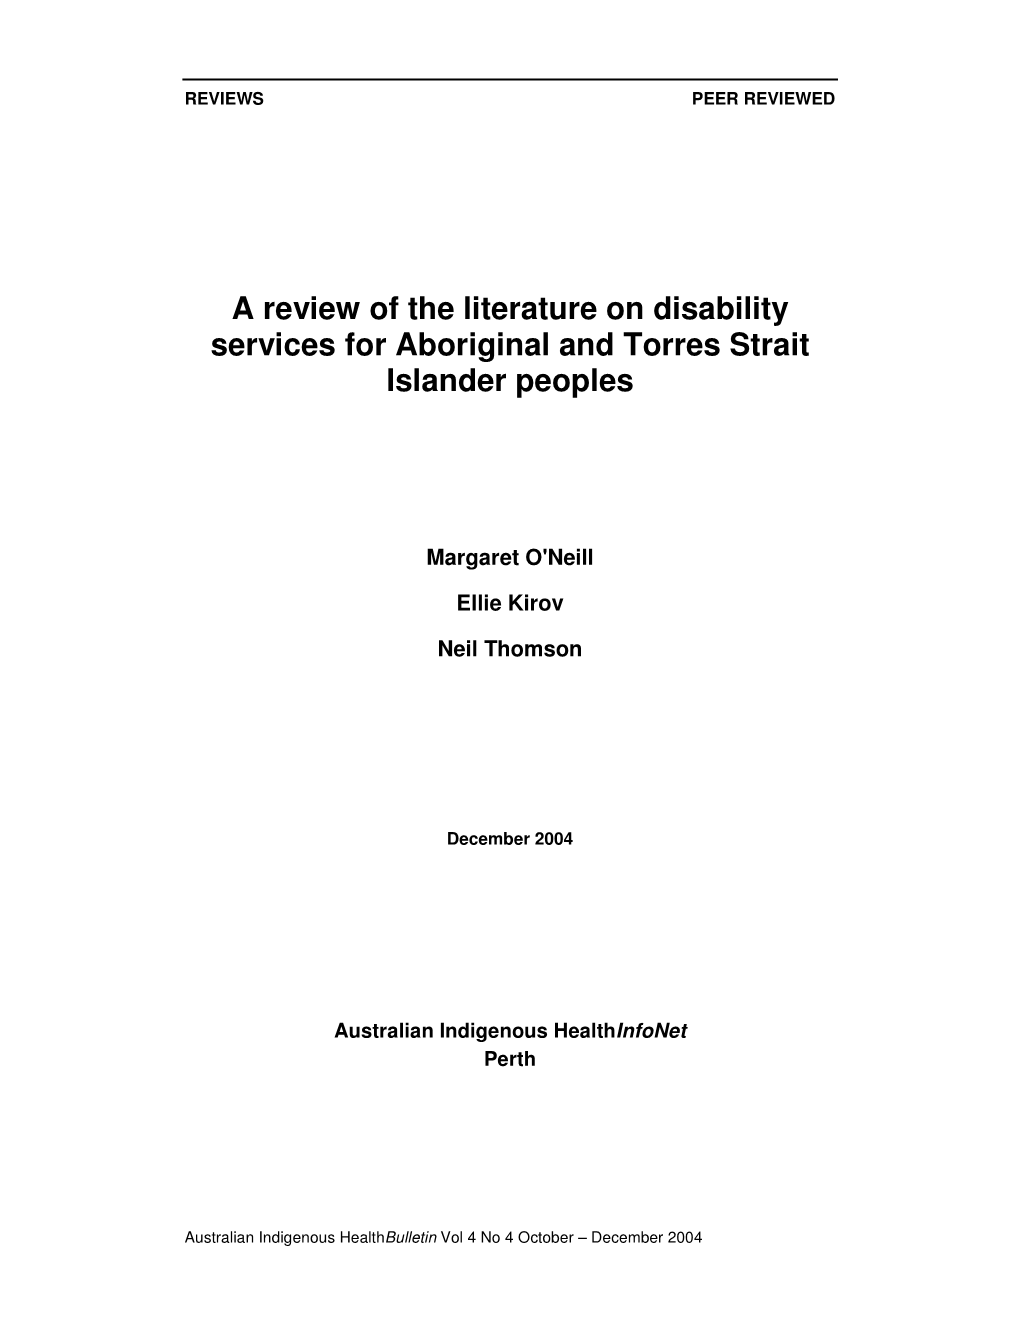 A Review of the Literature on Disability Services for Aboriginal and Torres Strait Islander Peoples